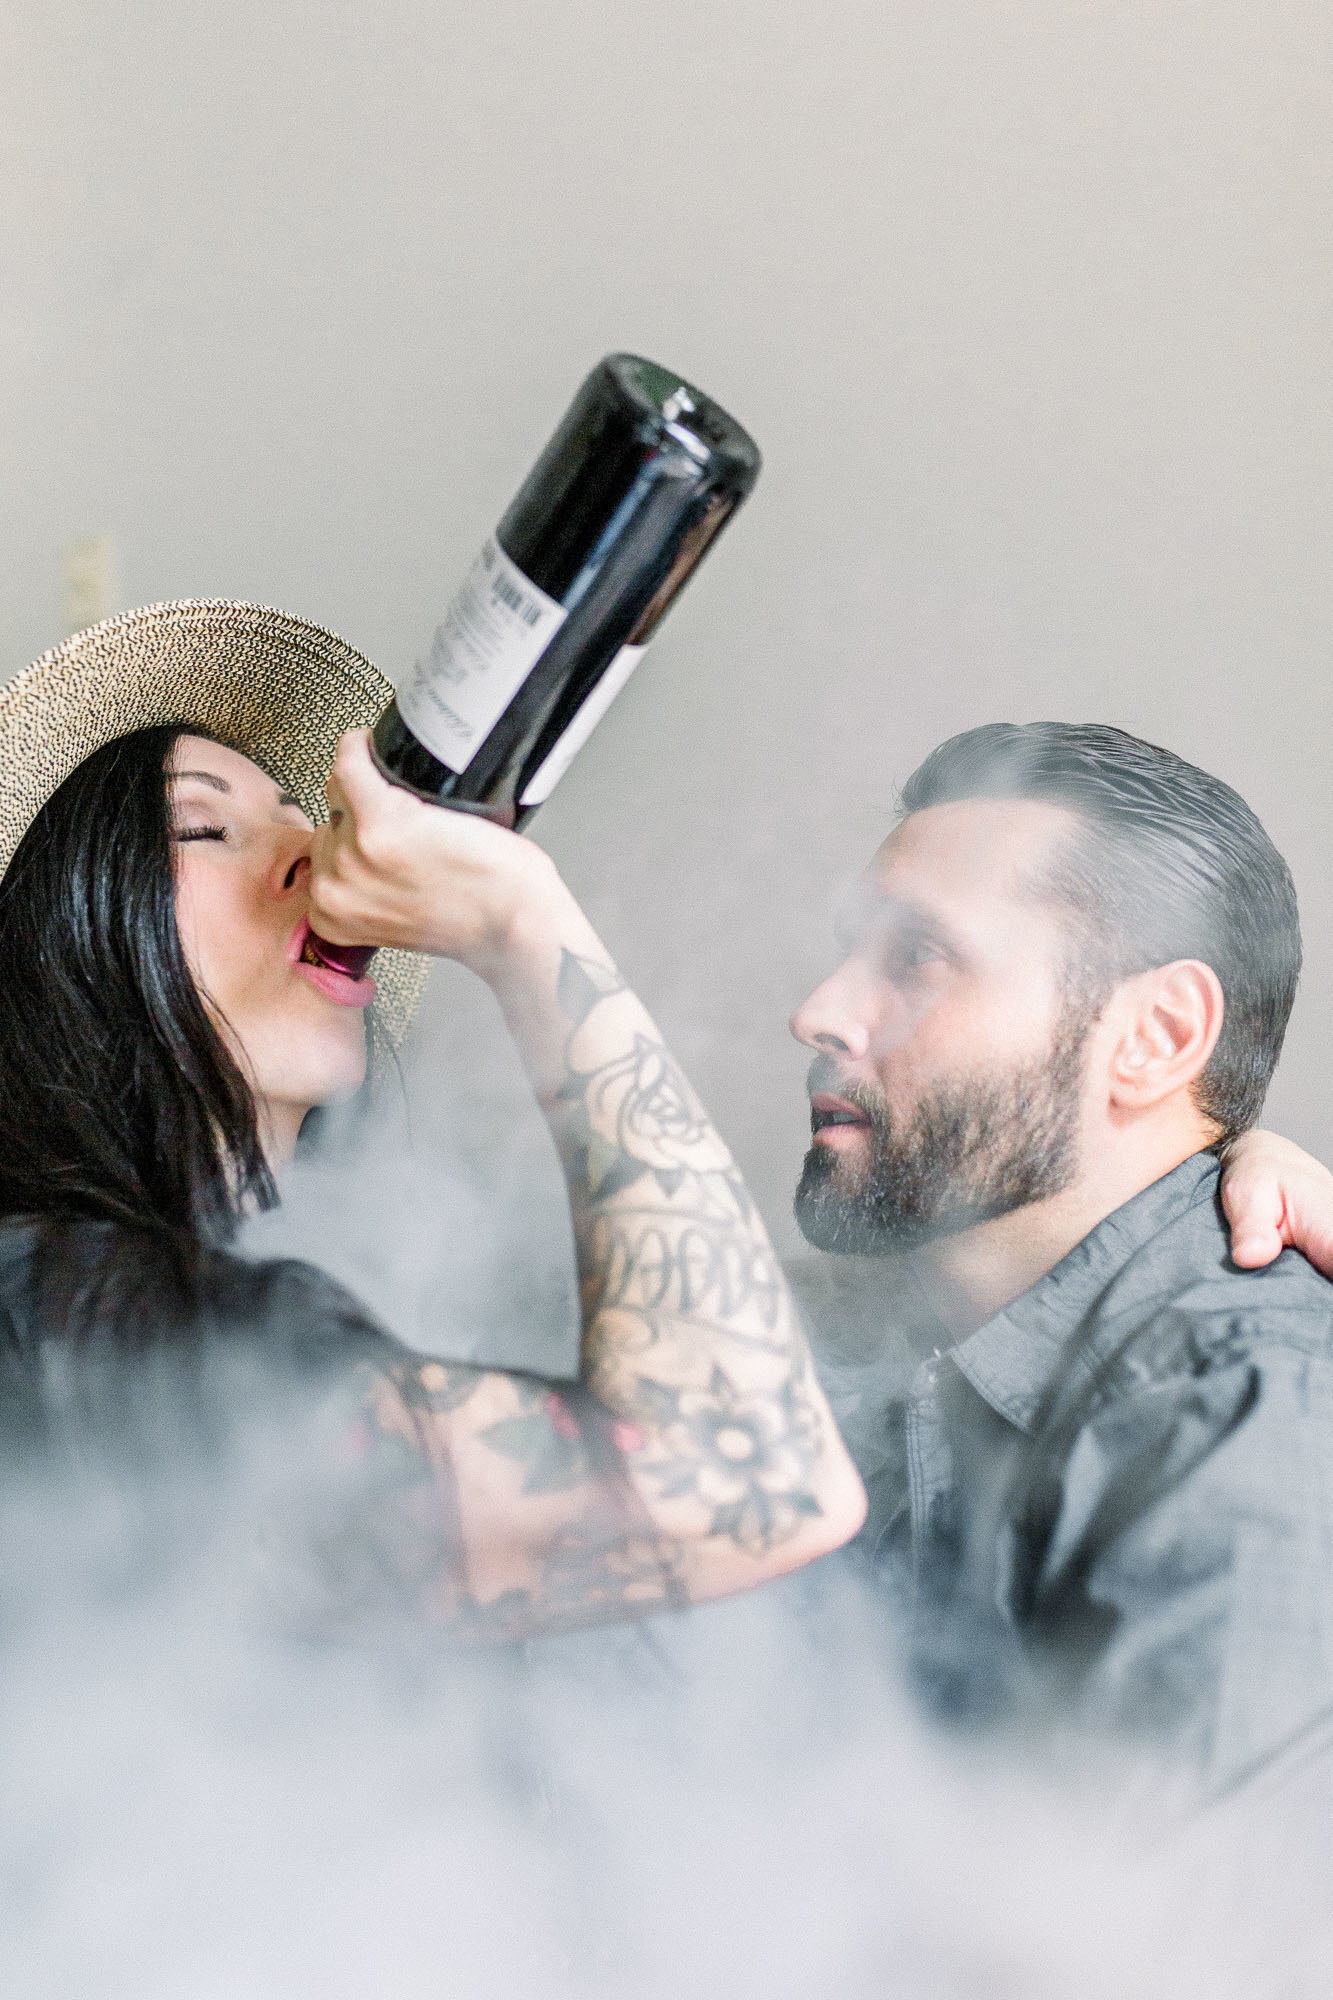 Fun loving couple captured by Staci Addison Photography